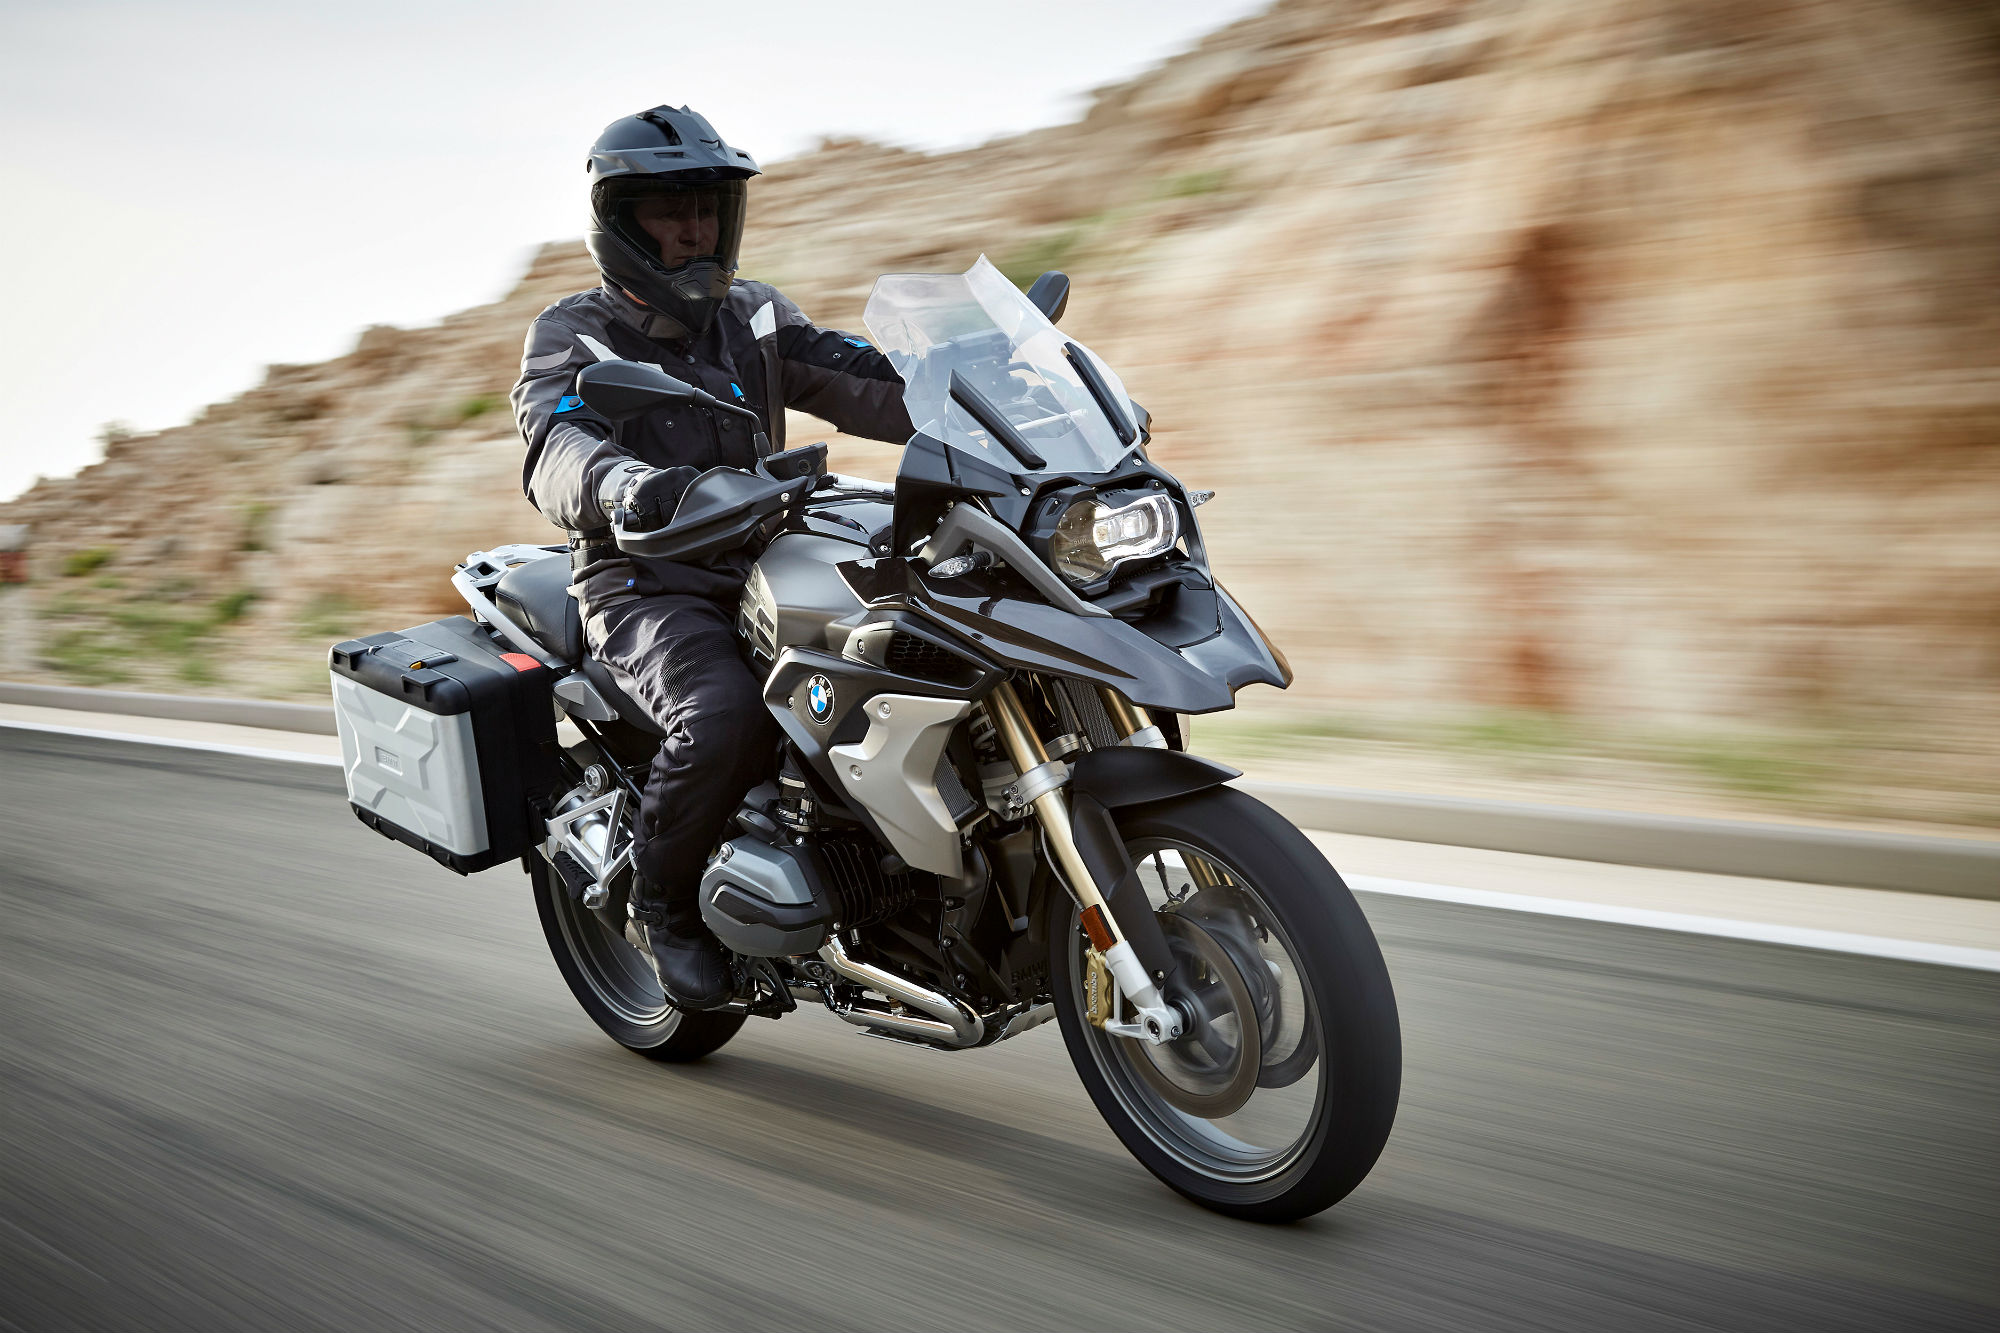 Updated BMW 1200GS revealed